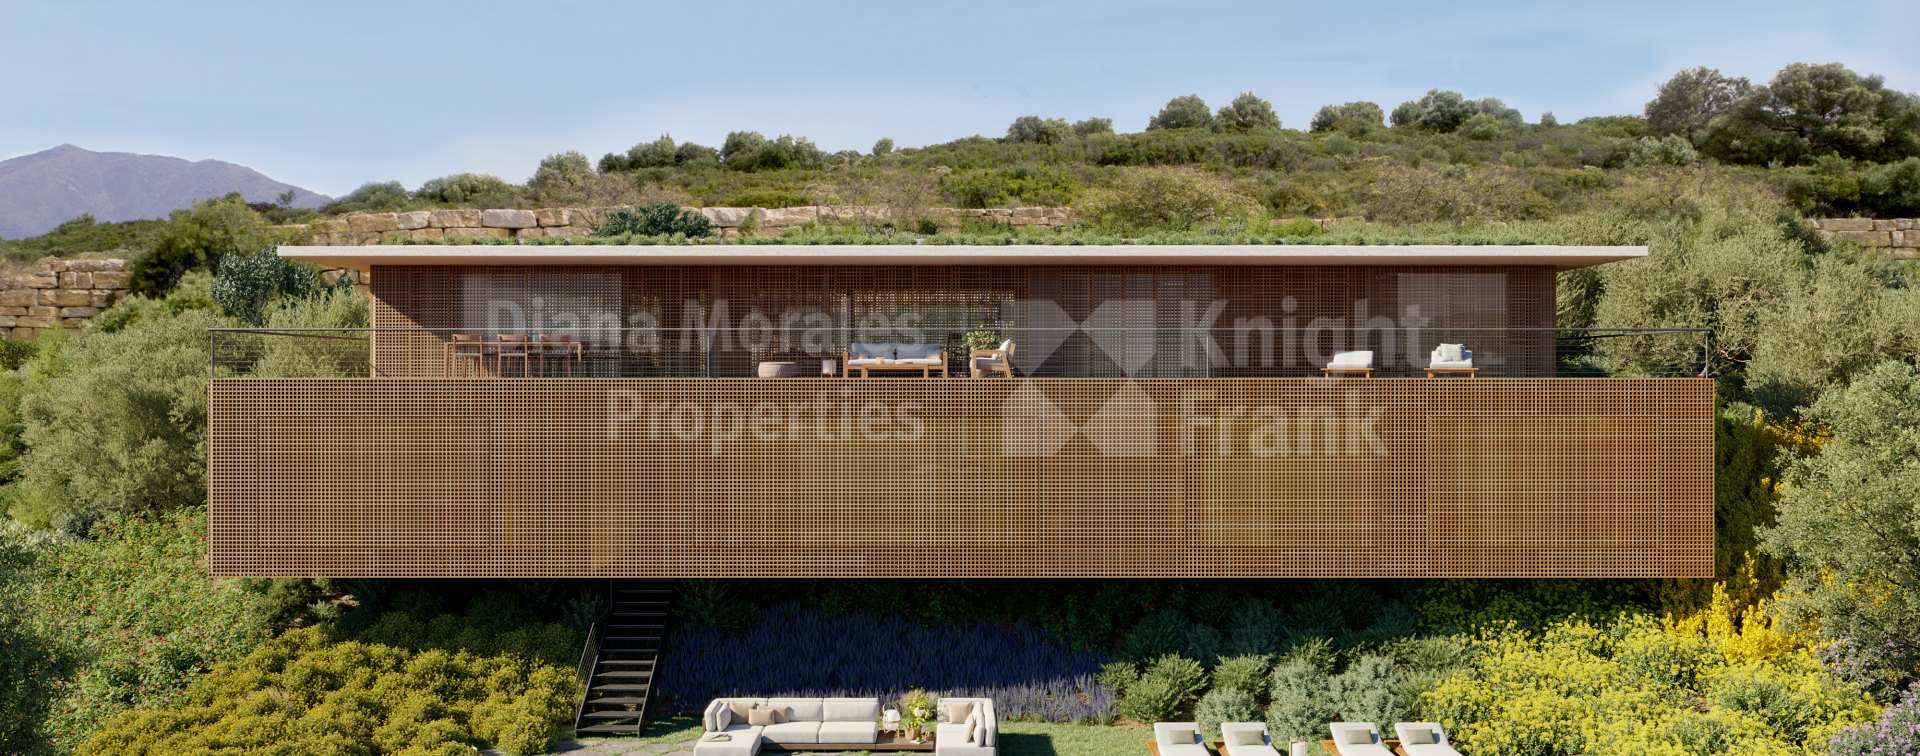 Turnkey project for an exquisitely designed villa at Finca Cortesin